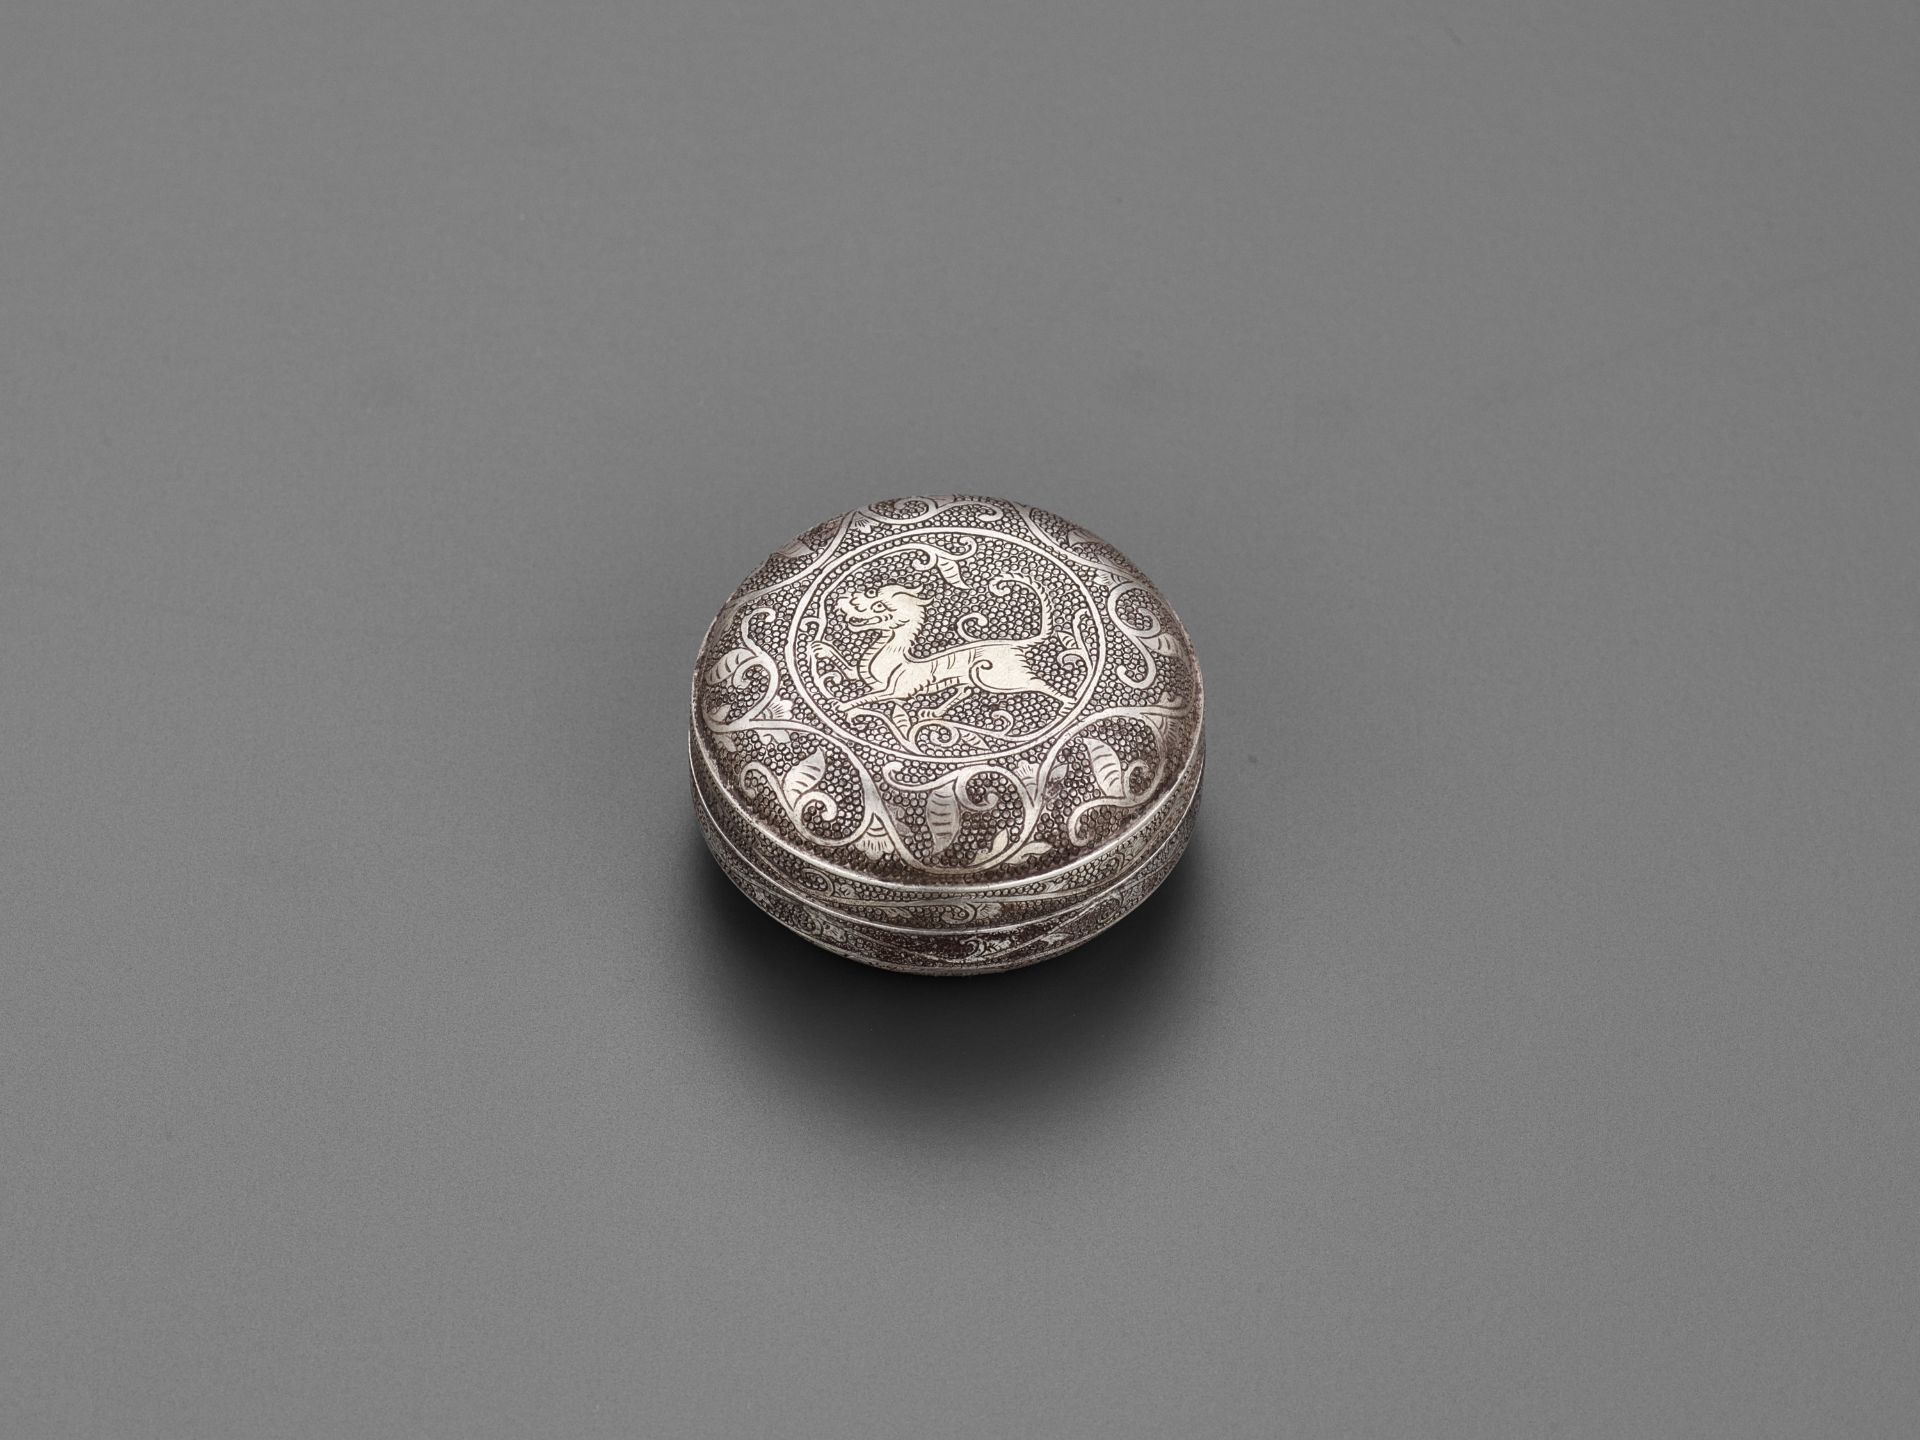 A 'MANDARIN DUCK' SILVER BOX AND COVER, TANG DYNASTY - Image 2 of 19